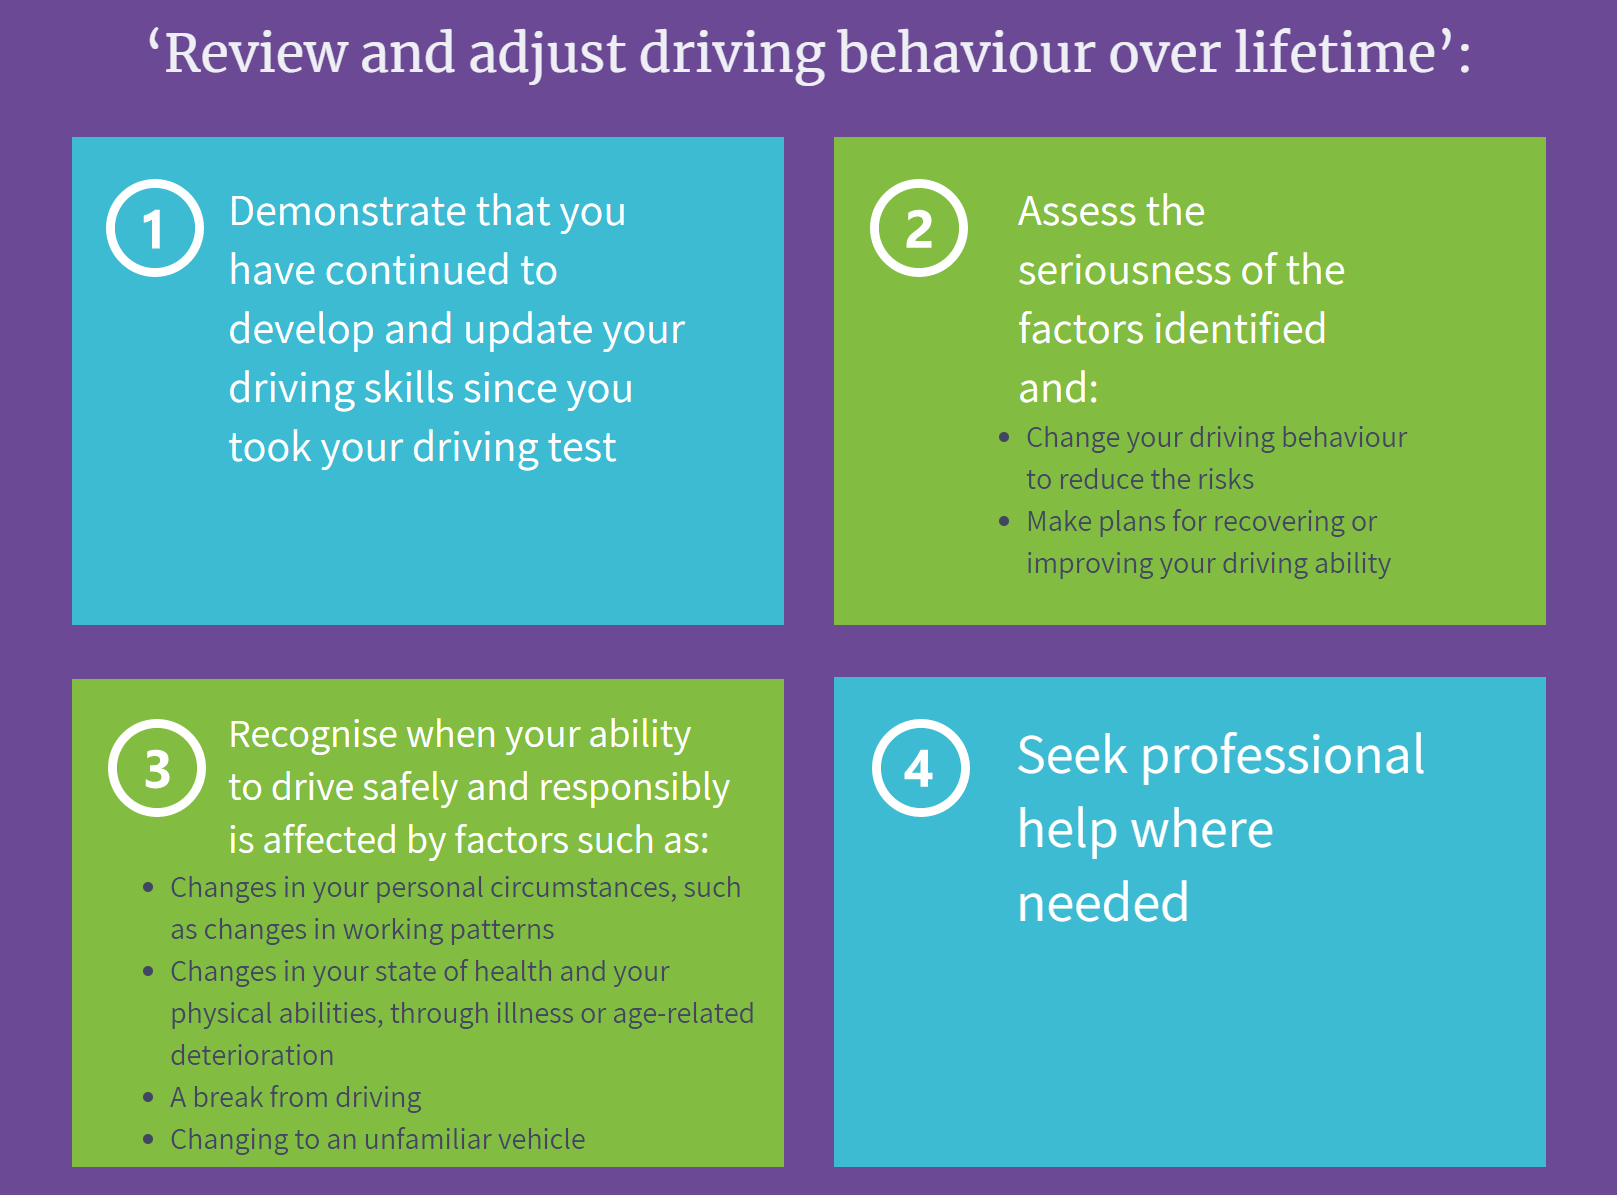 Review and adjust driving behaviour for safer driving